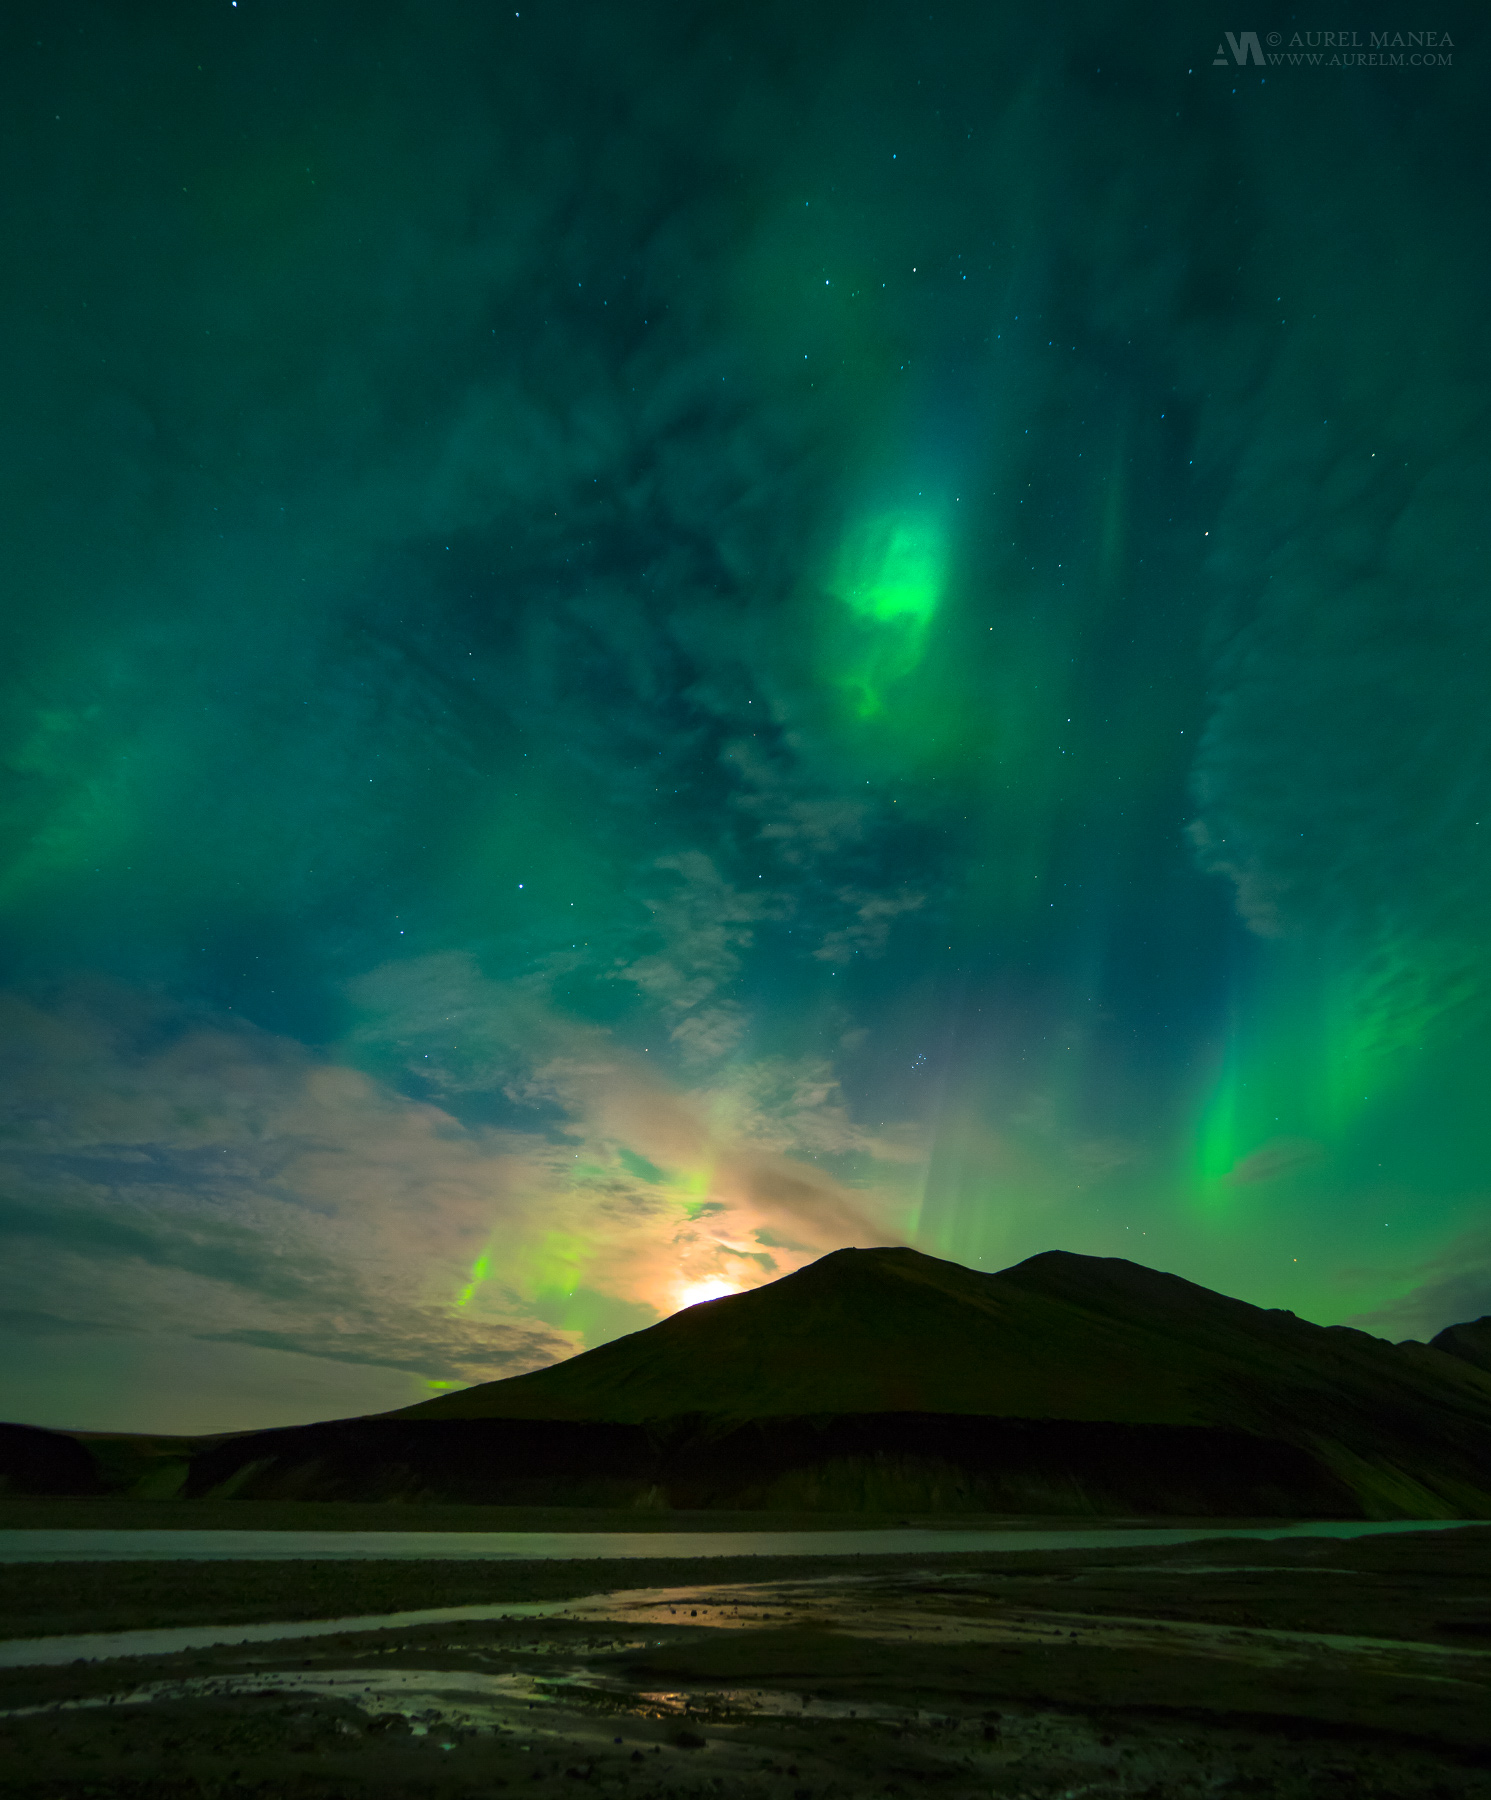 Gallery Northern lights in Iceland Highlands with moon 02